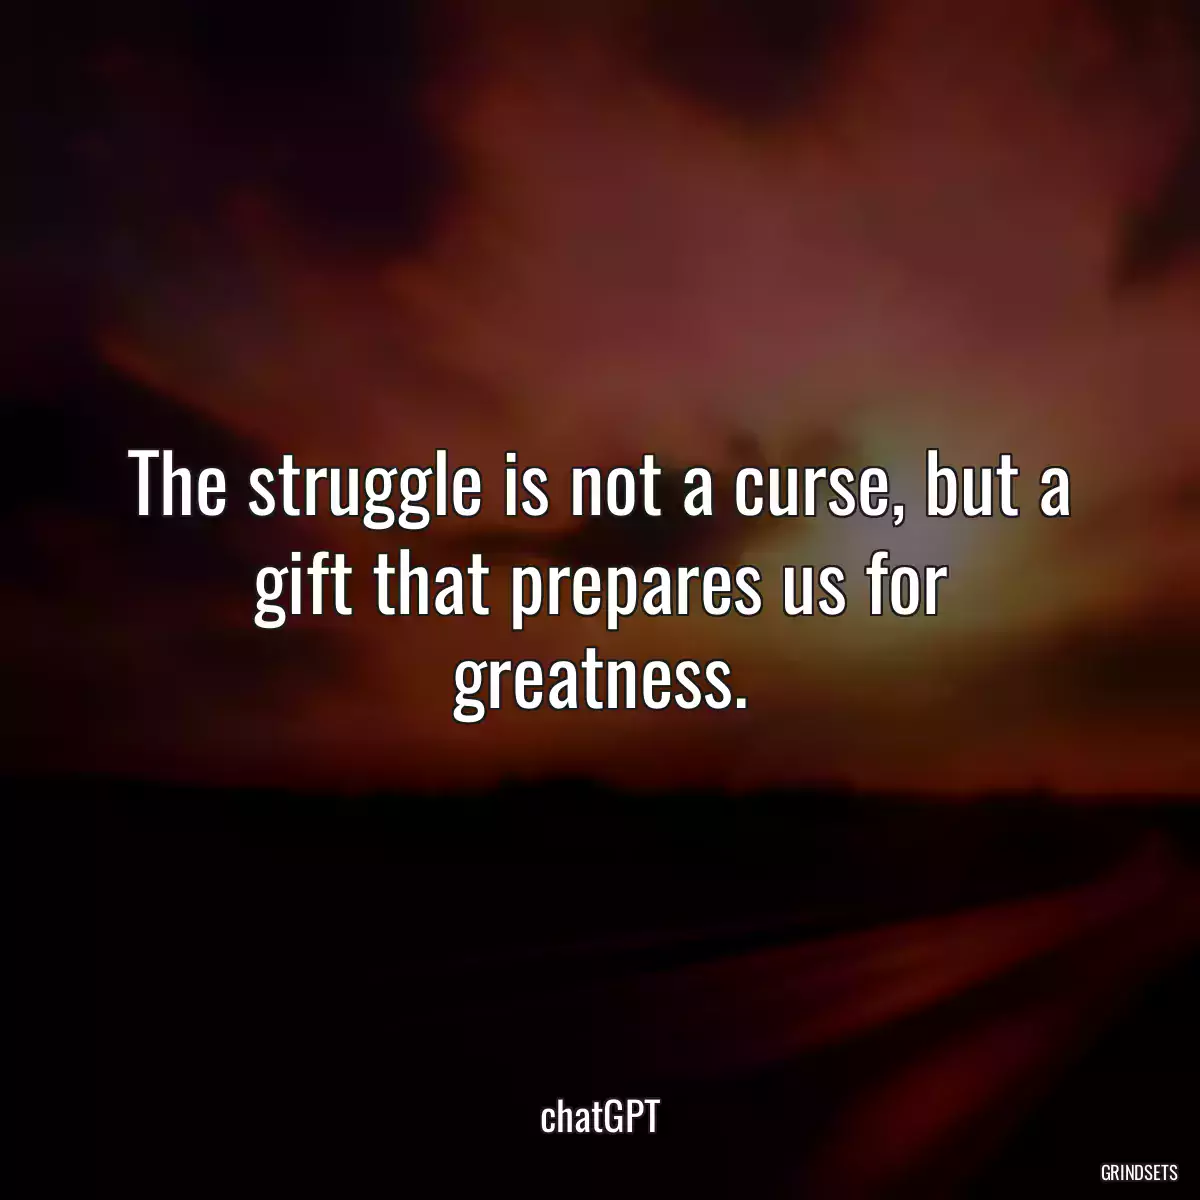 The struggle is not a curse, but a gift that prepares us for greatness.